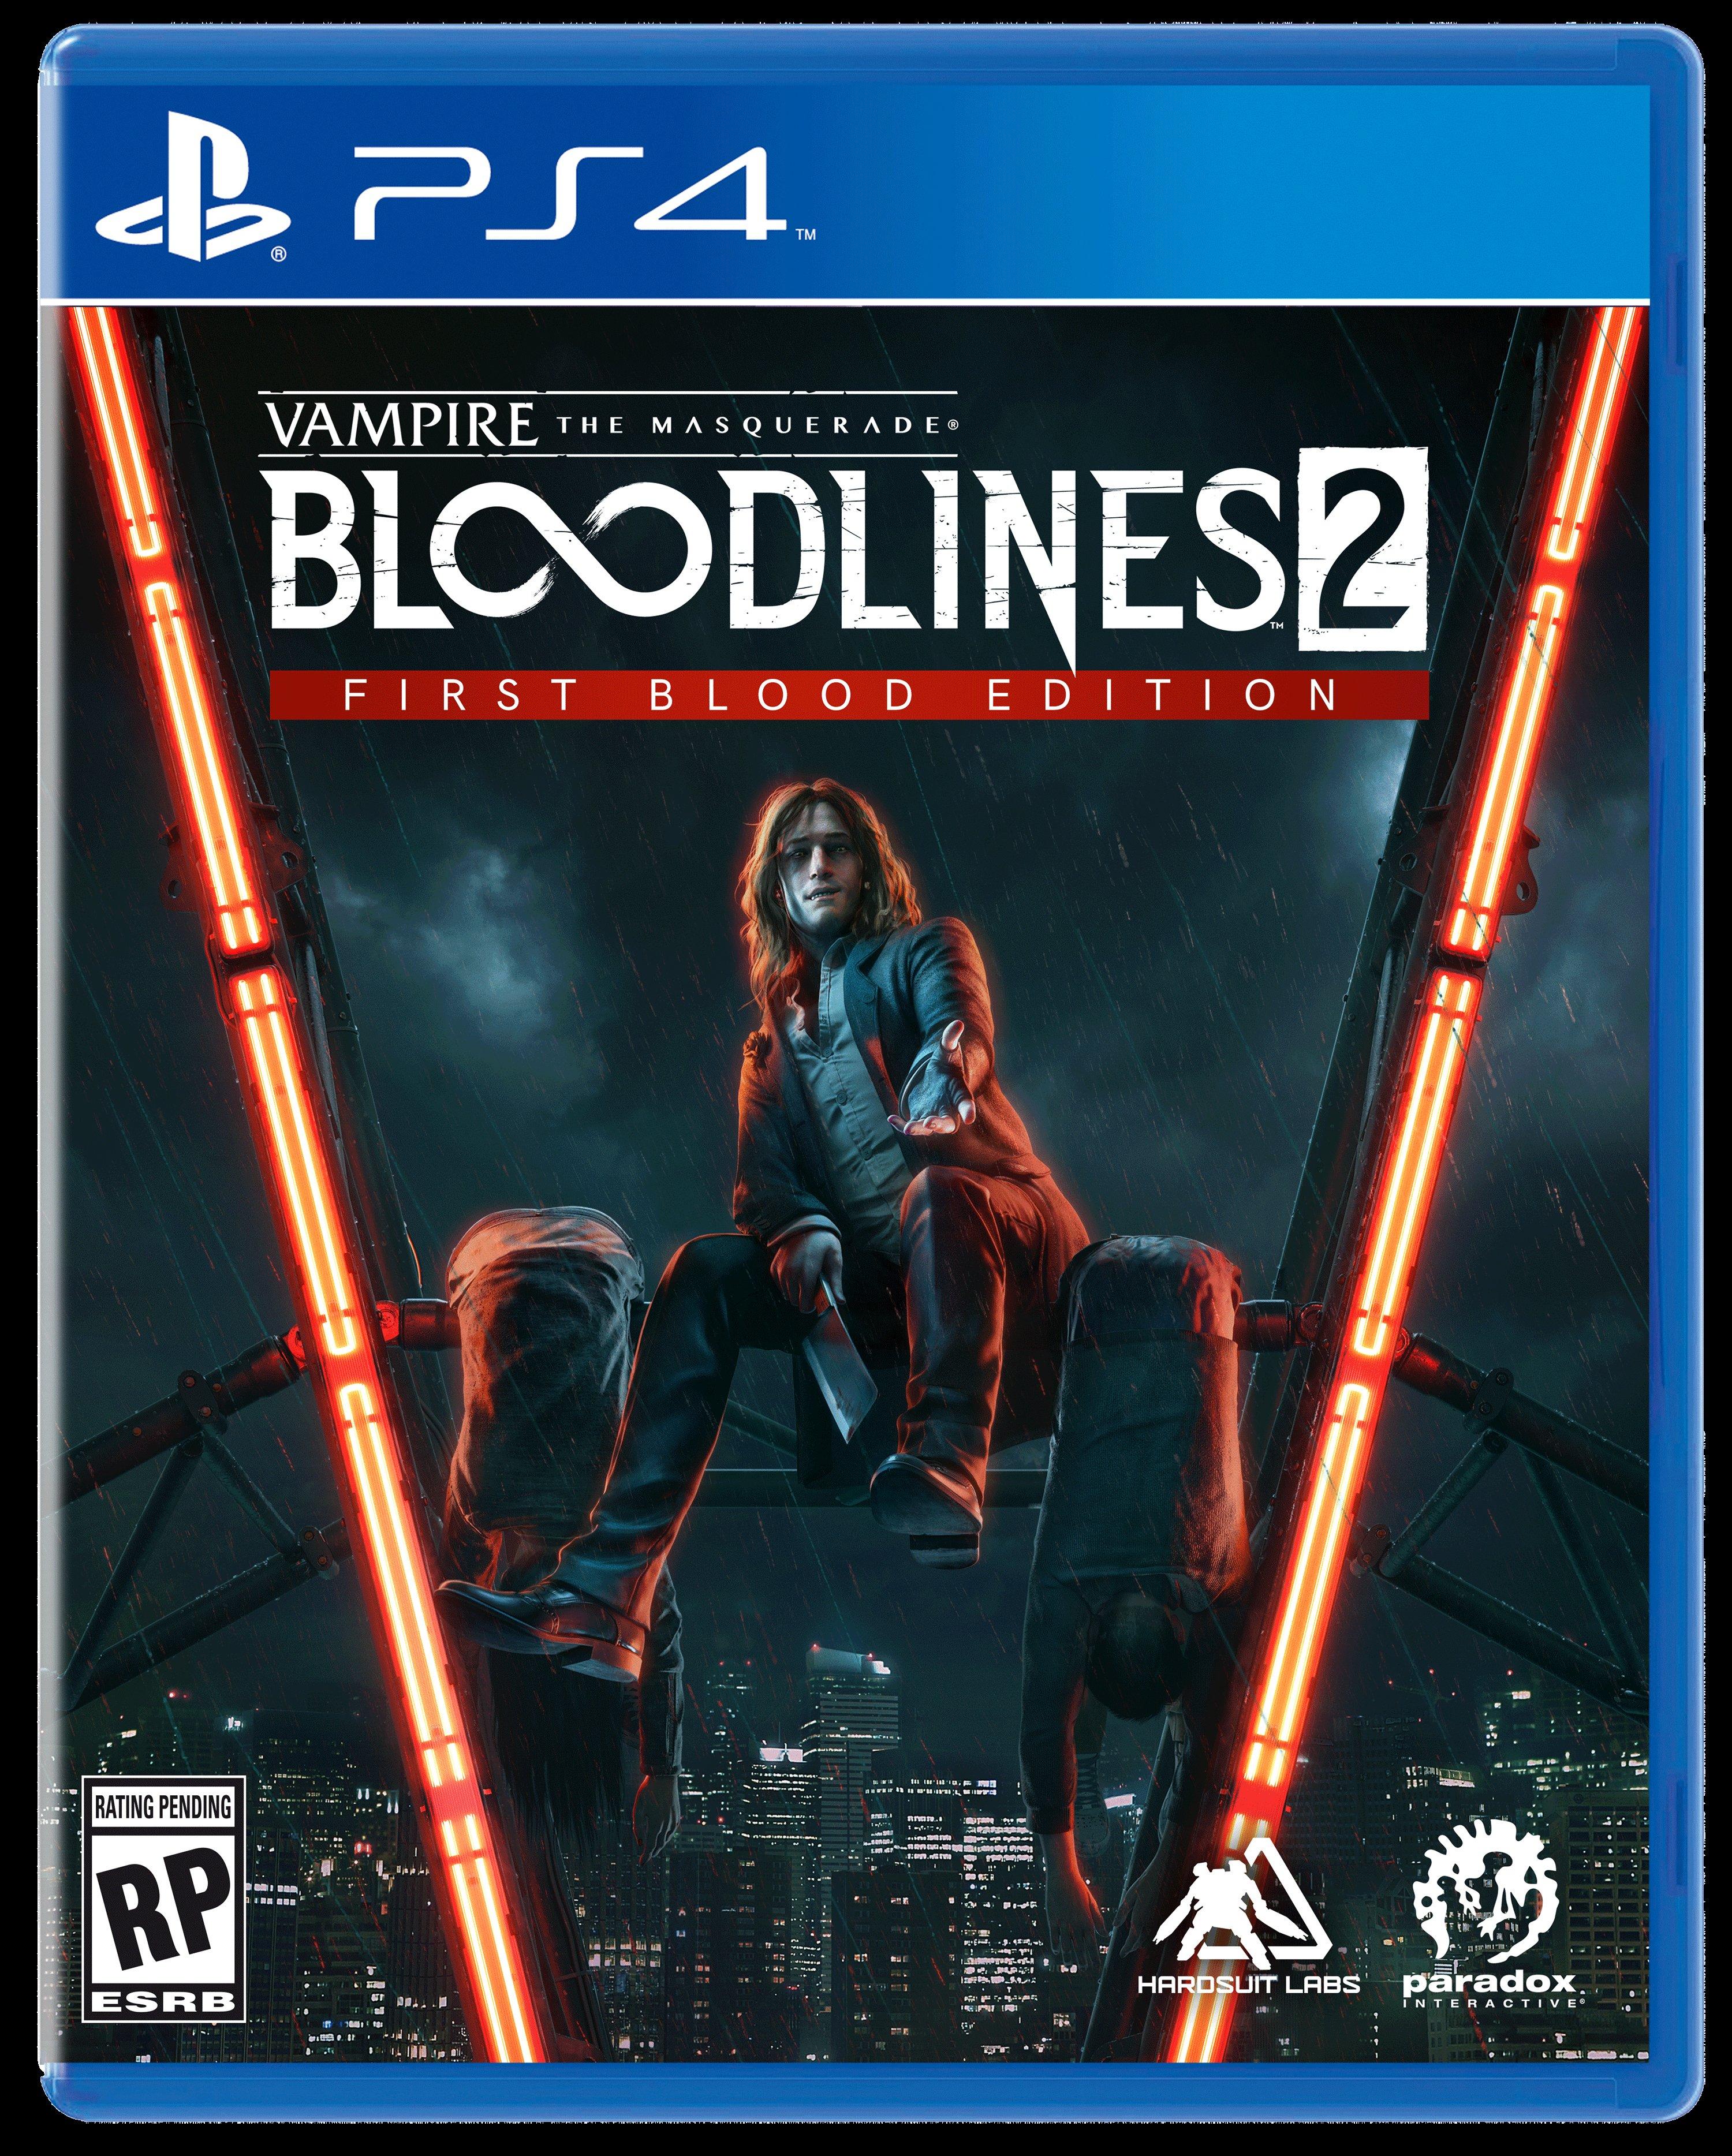 Vampire: The Masquerade - Bloodlines 2 Archives - DSOGaming